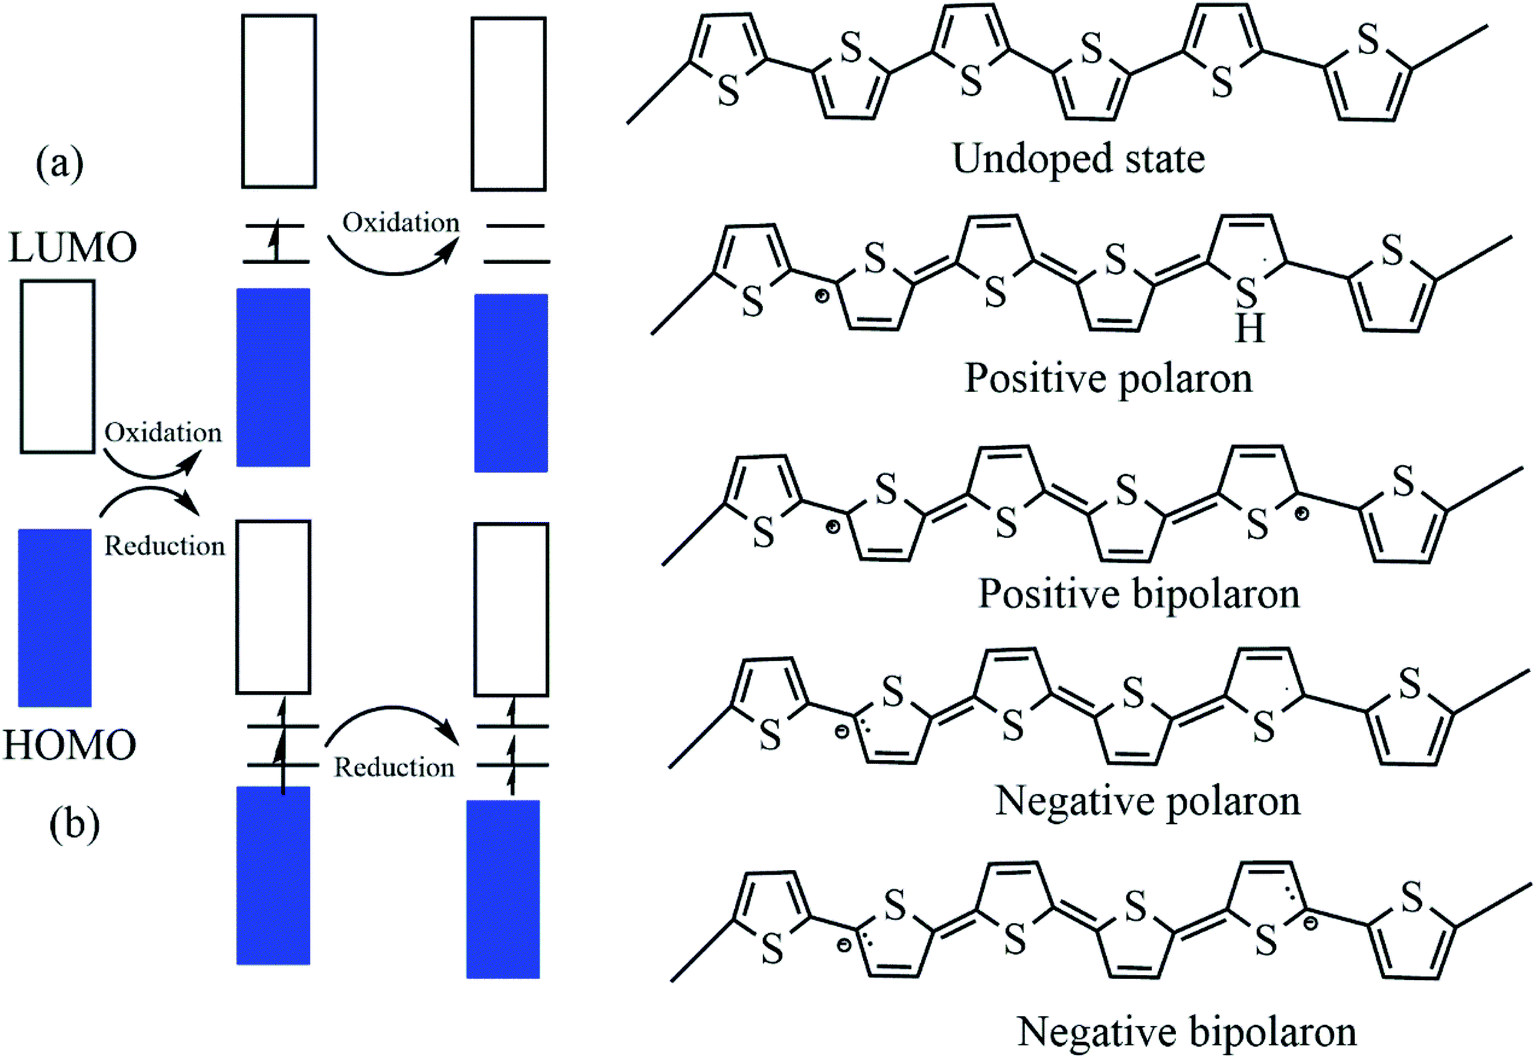 Conducting polymers: a comprehensive review on recent advances in  synthesis, properties and applications - RSC Advances (RSC Publishing)  DOI:10.1039/D0RA07800J